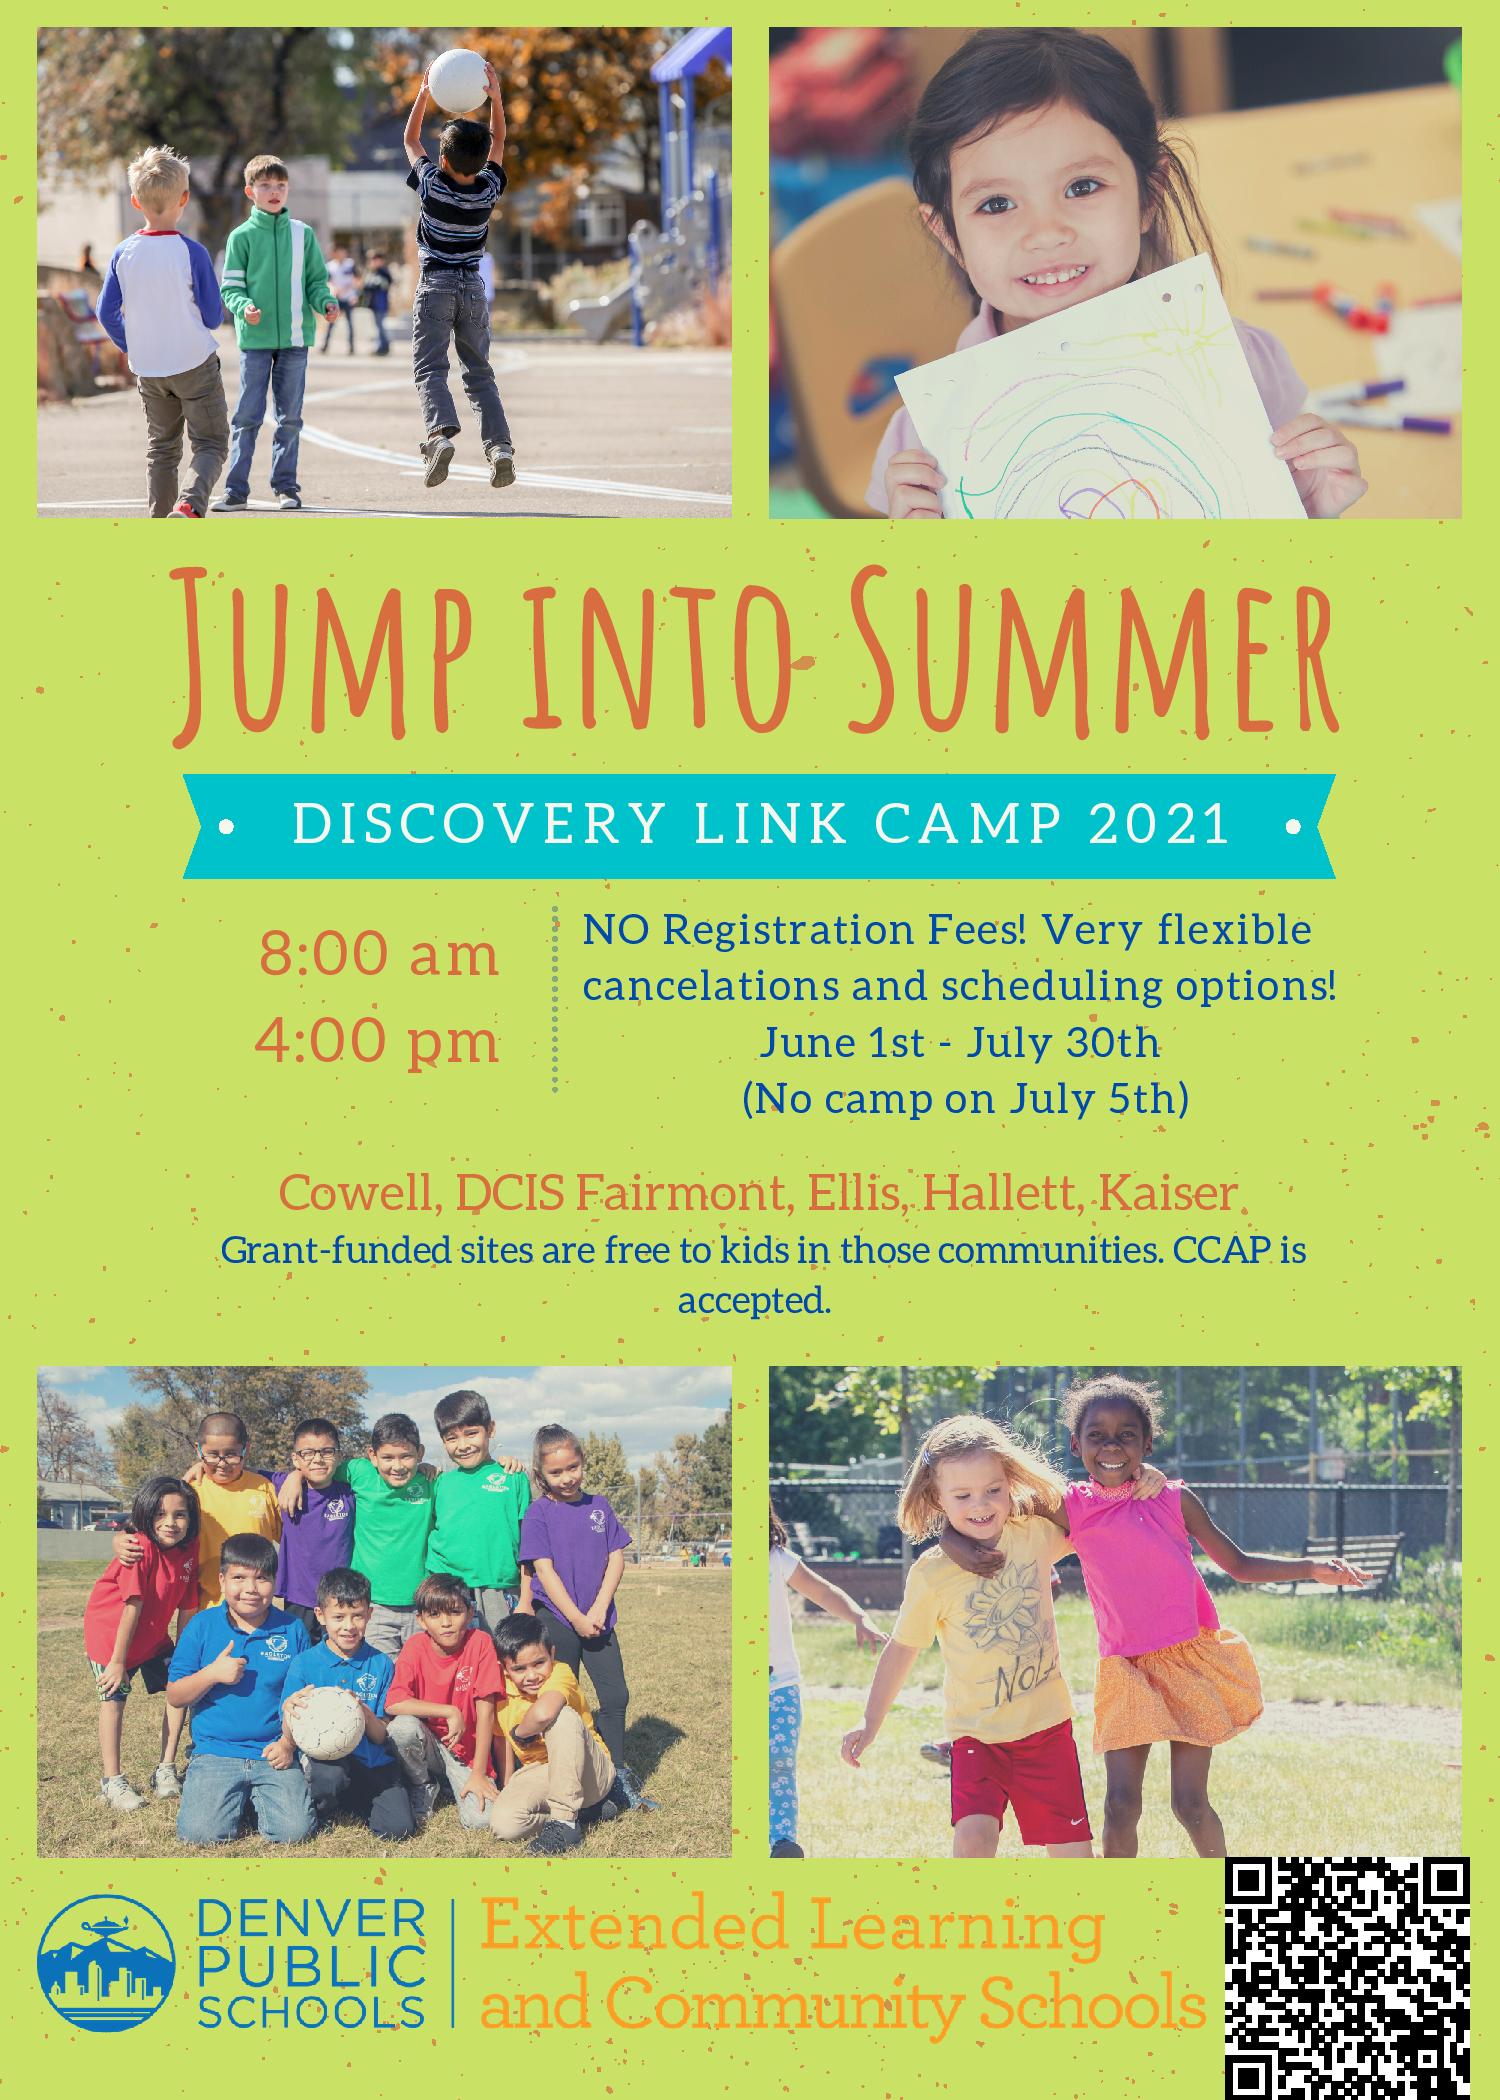 Colfax Elementary » Discovery Link Summer Camp